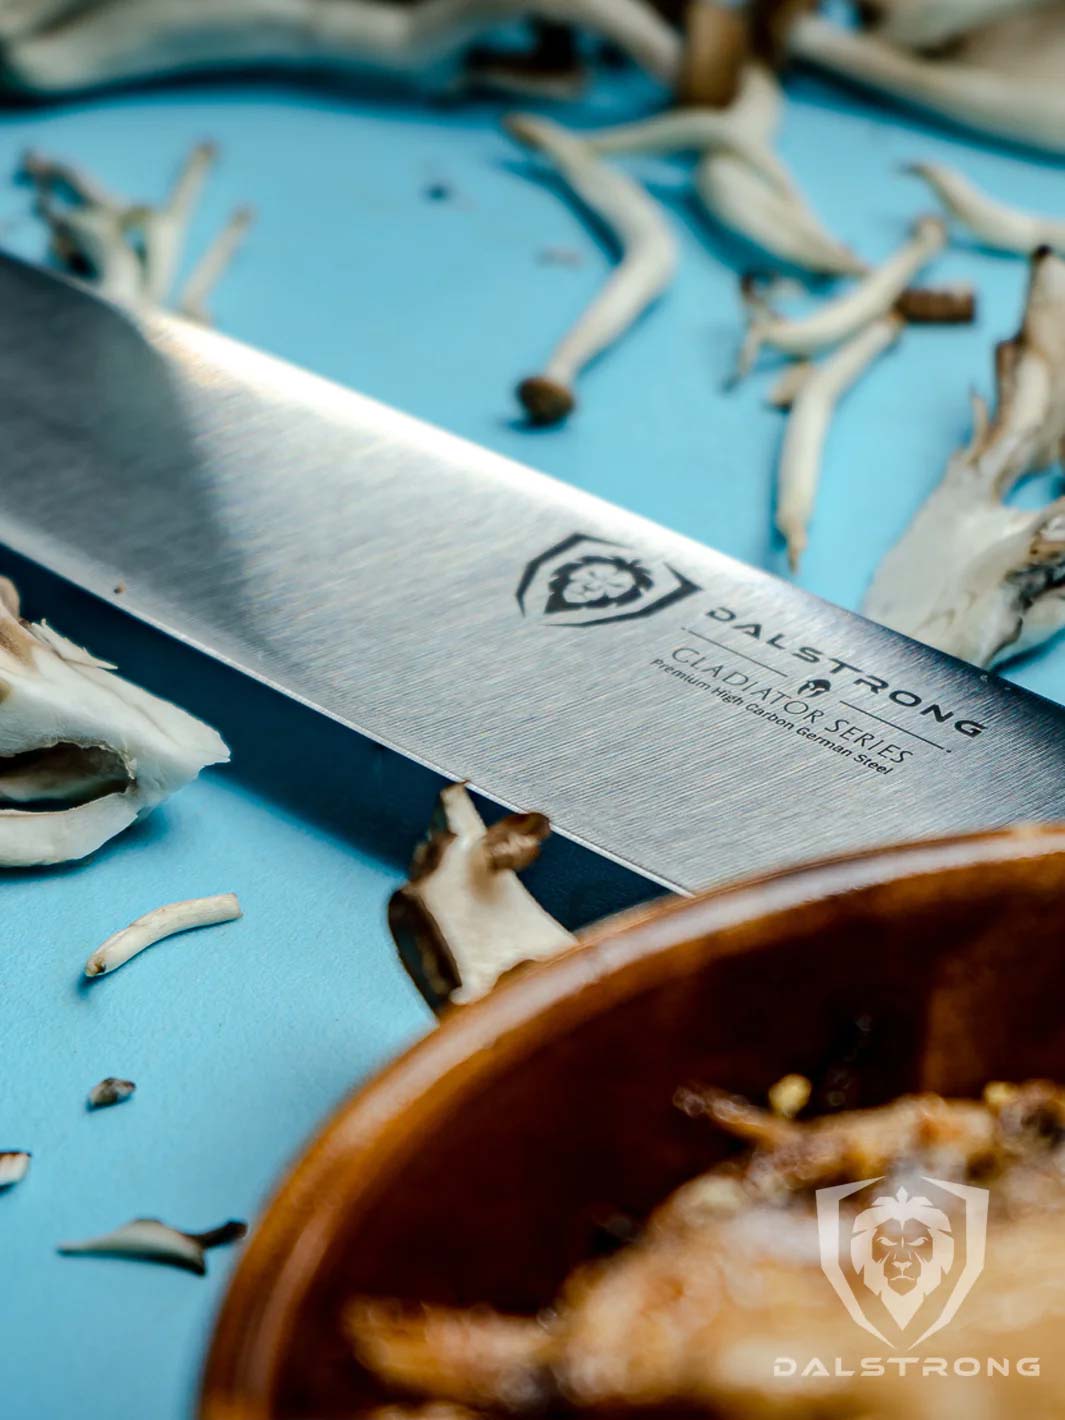 Dalstrong gladiator series 8.5 inch kiritsuke knife showcasing it's series and dalstrong logo on a blue cutting board.